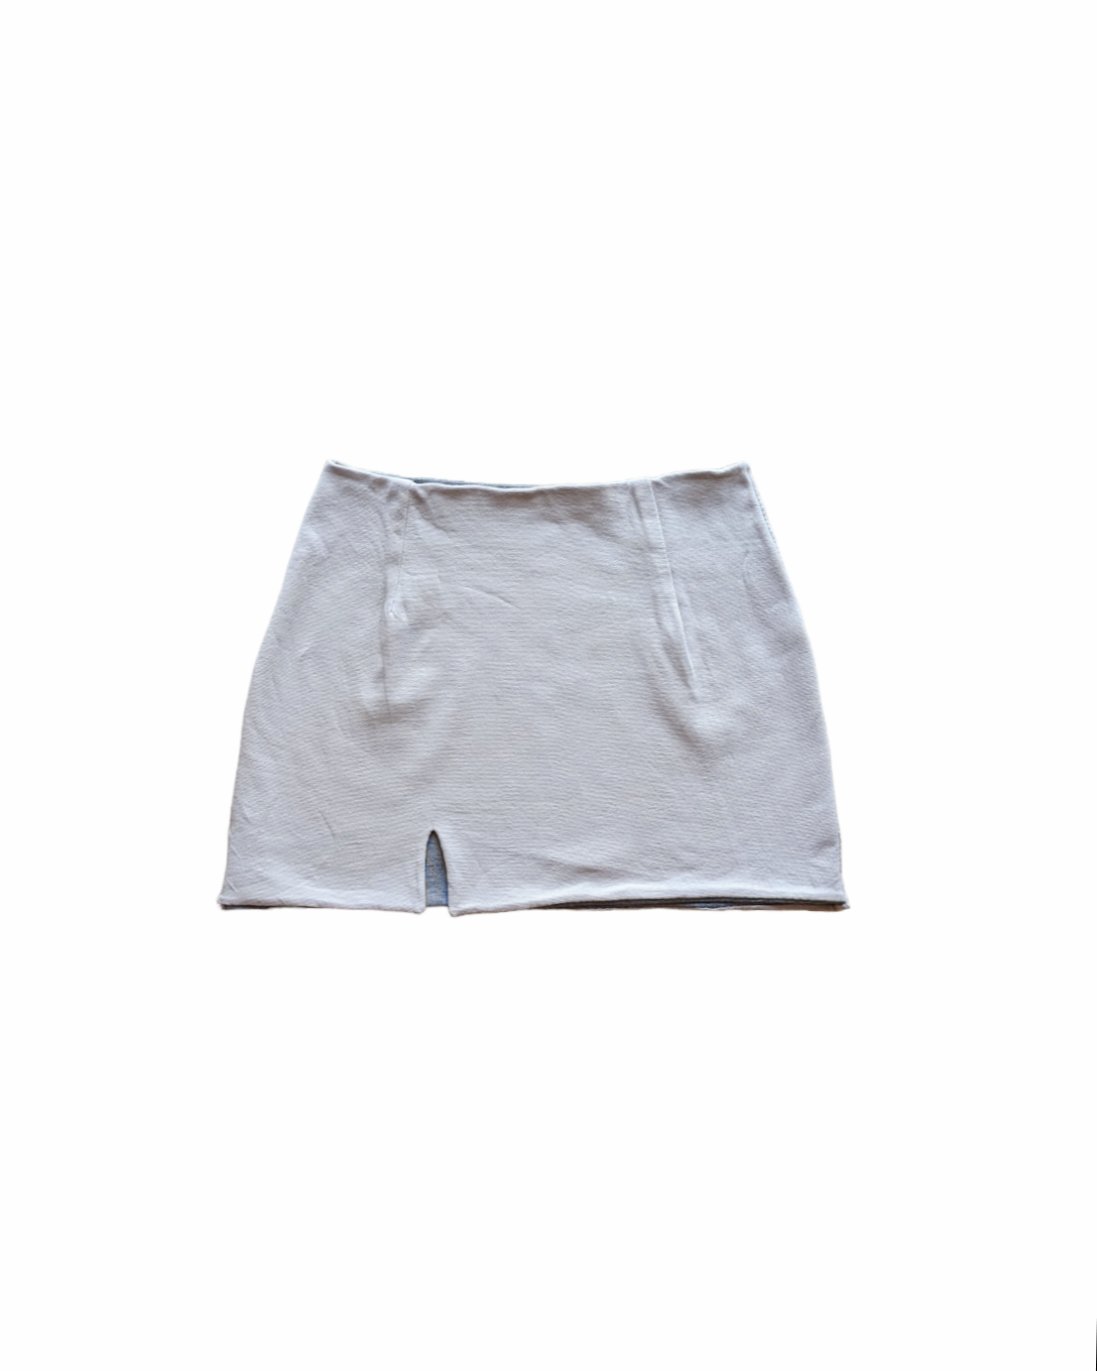 Image of CATCALL: THE REVERSIBLE MINI SKIRT in STONE